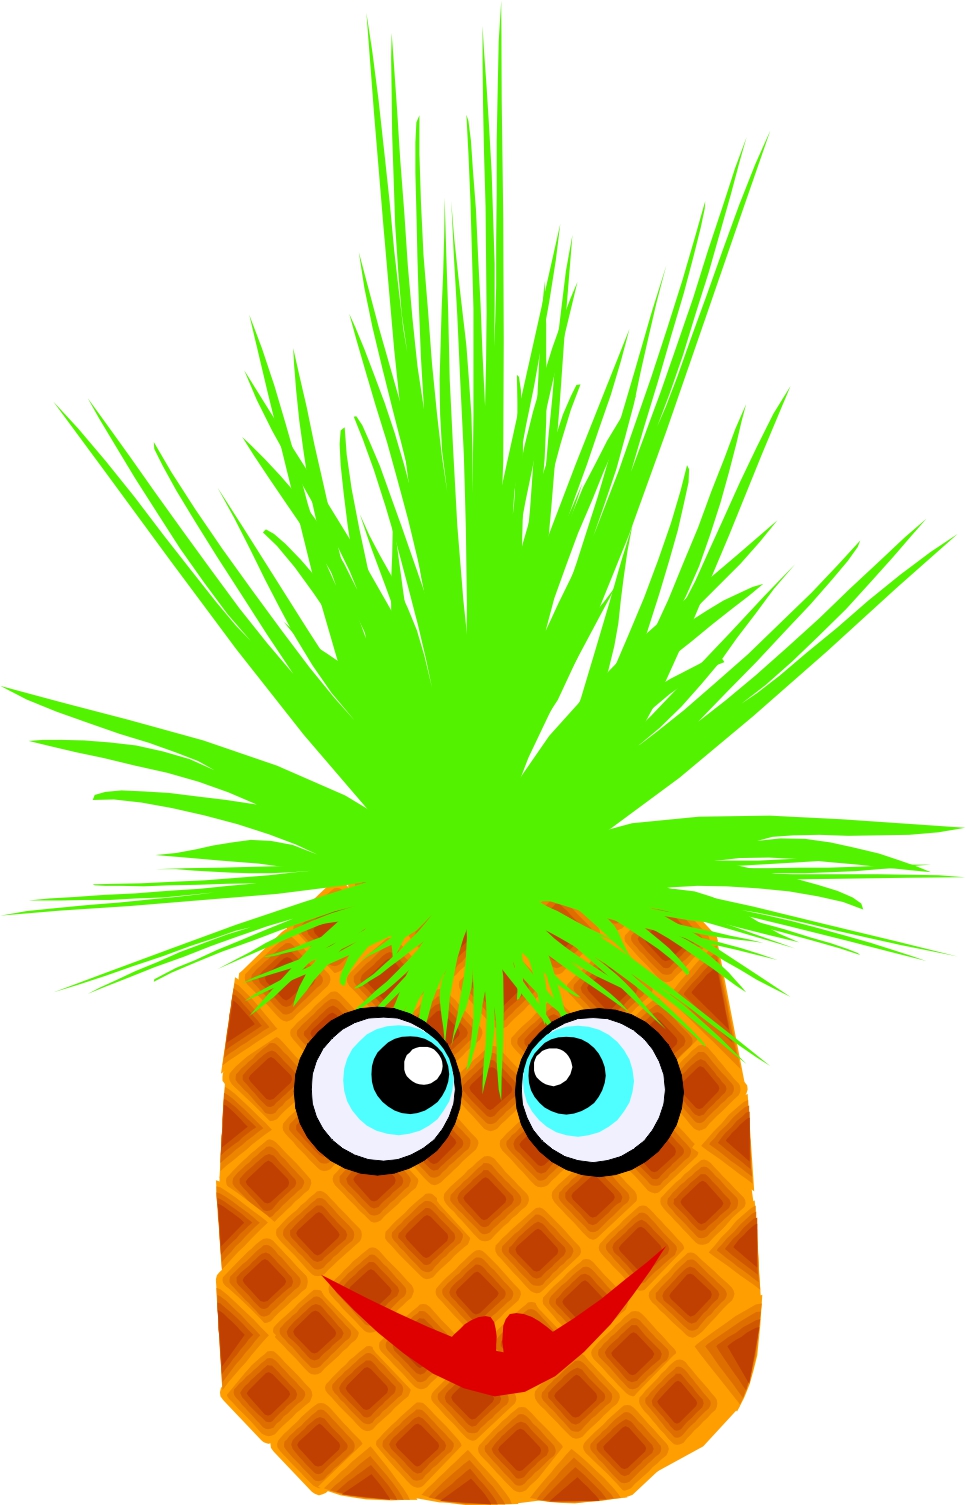 Cartoon Pictures Of Pineapple - ClipArt Best